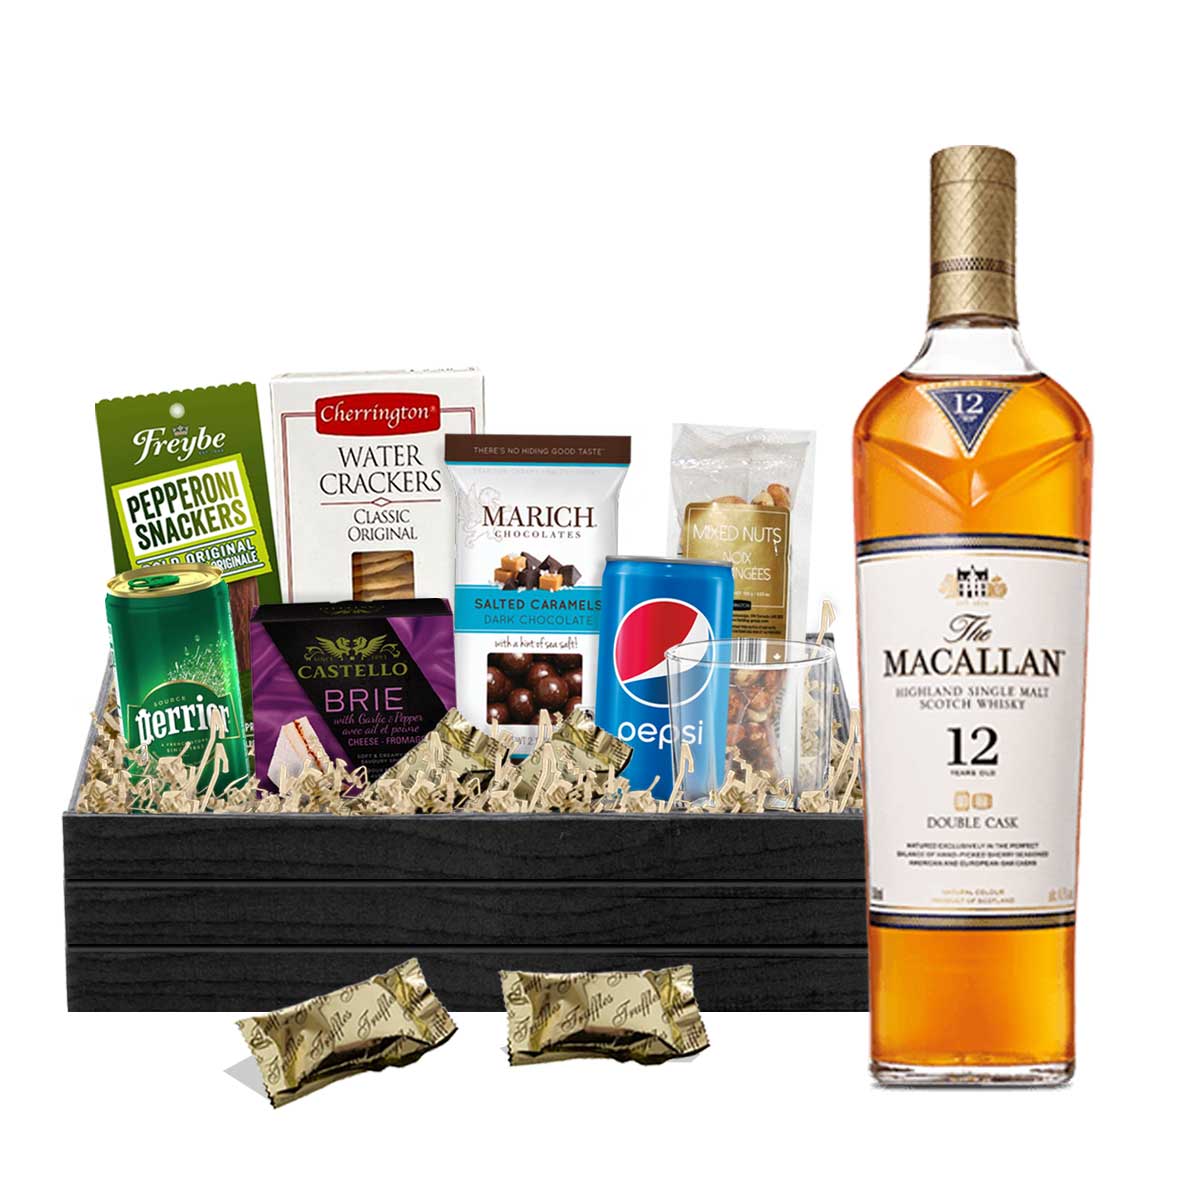 TAG Liquor Stores BC - Macallan 12 Year Old Double Cask Scotch Whisky 750ml Gift Basket